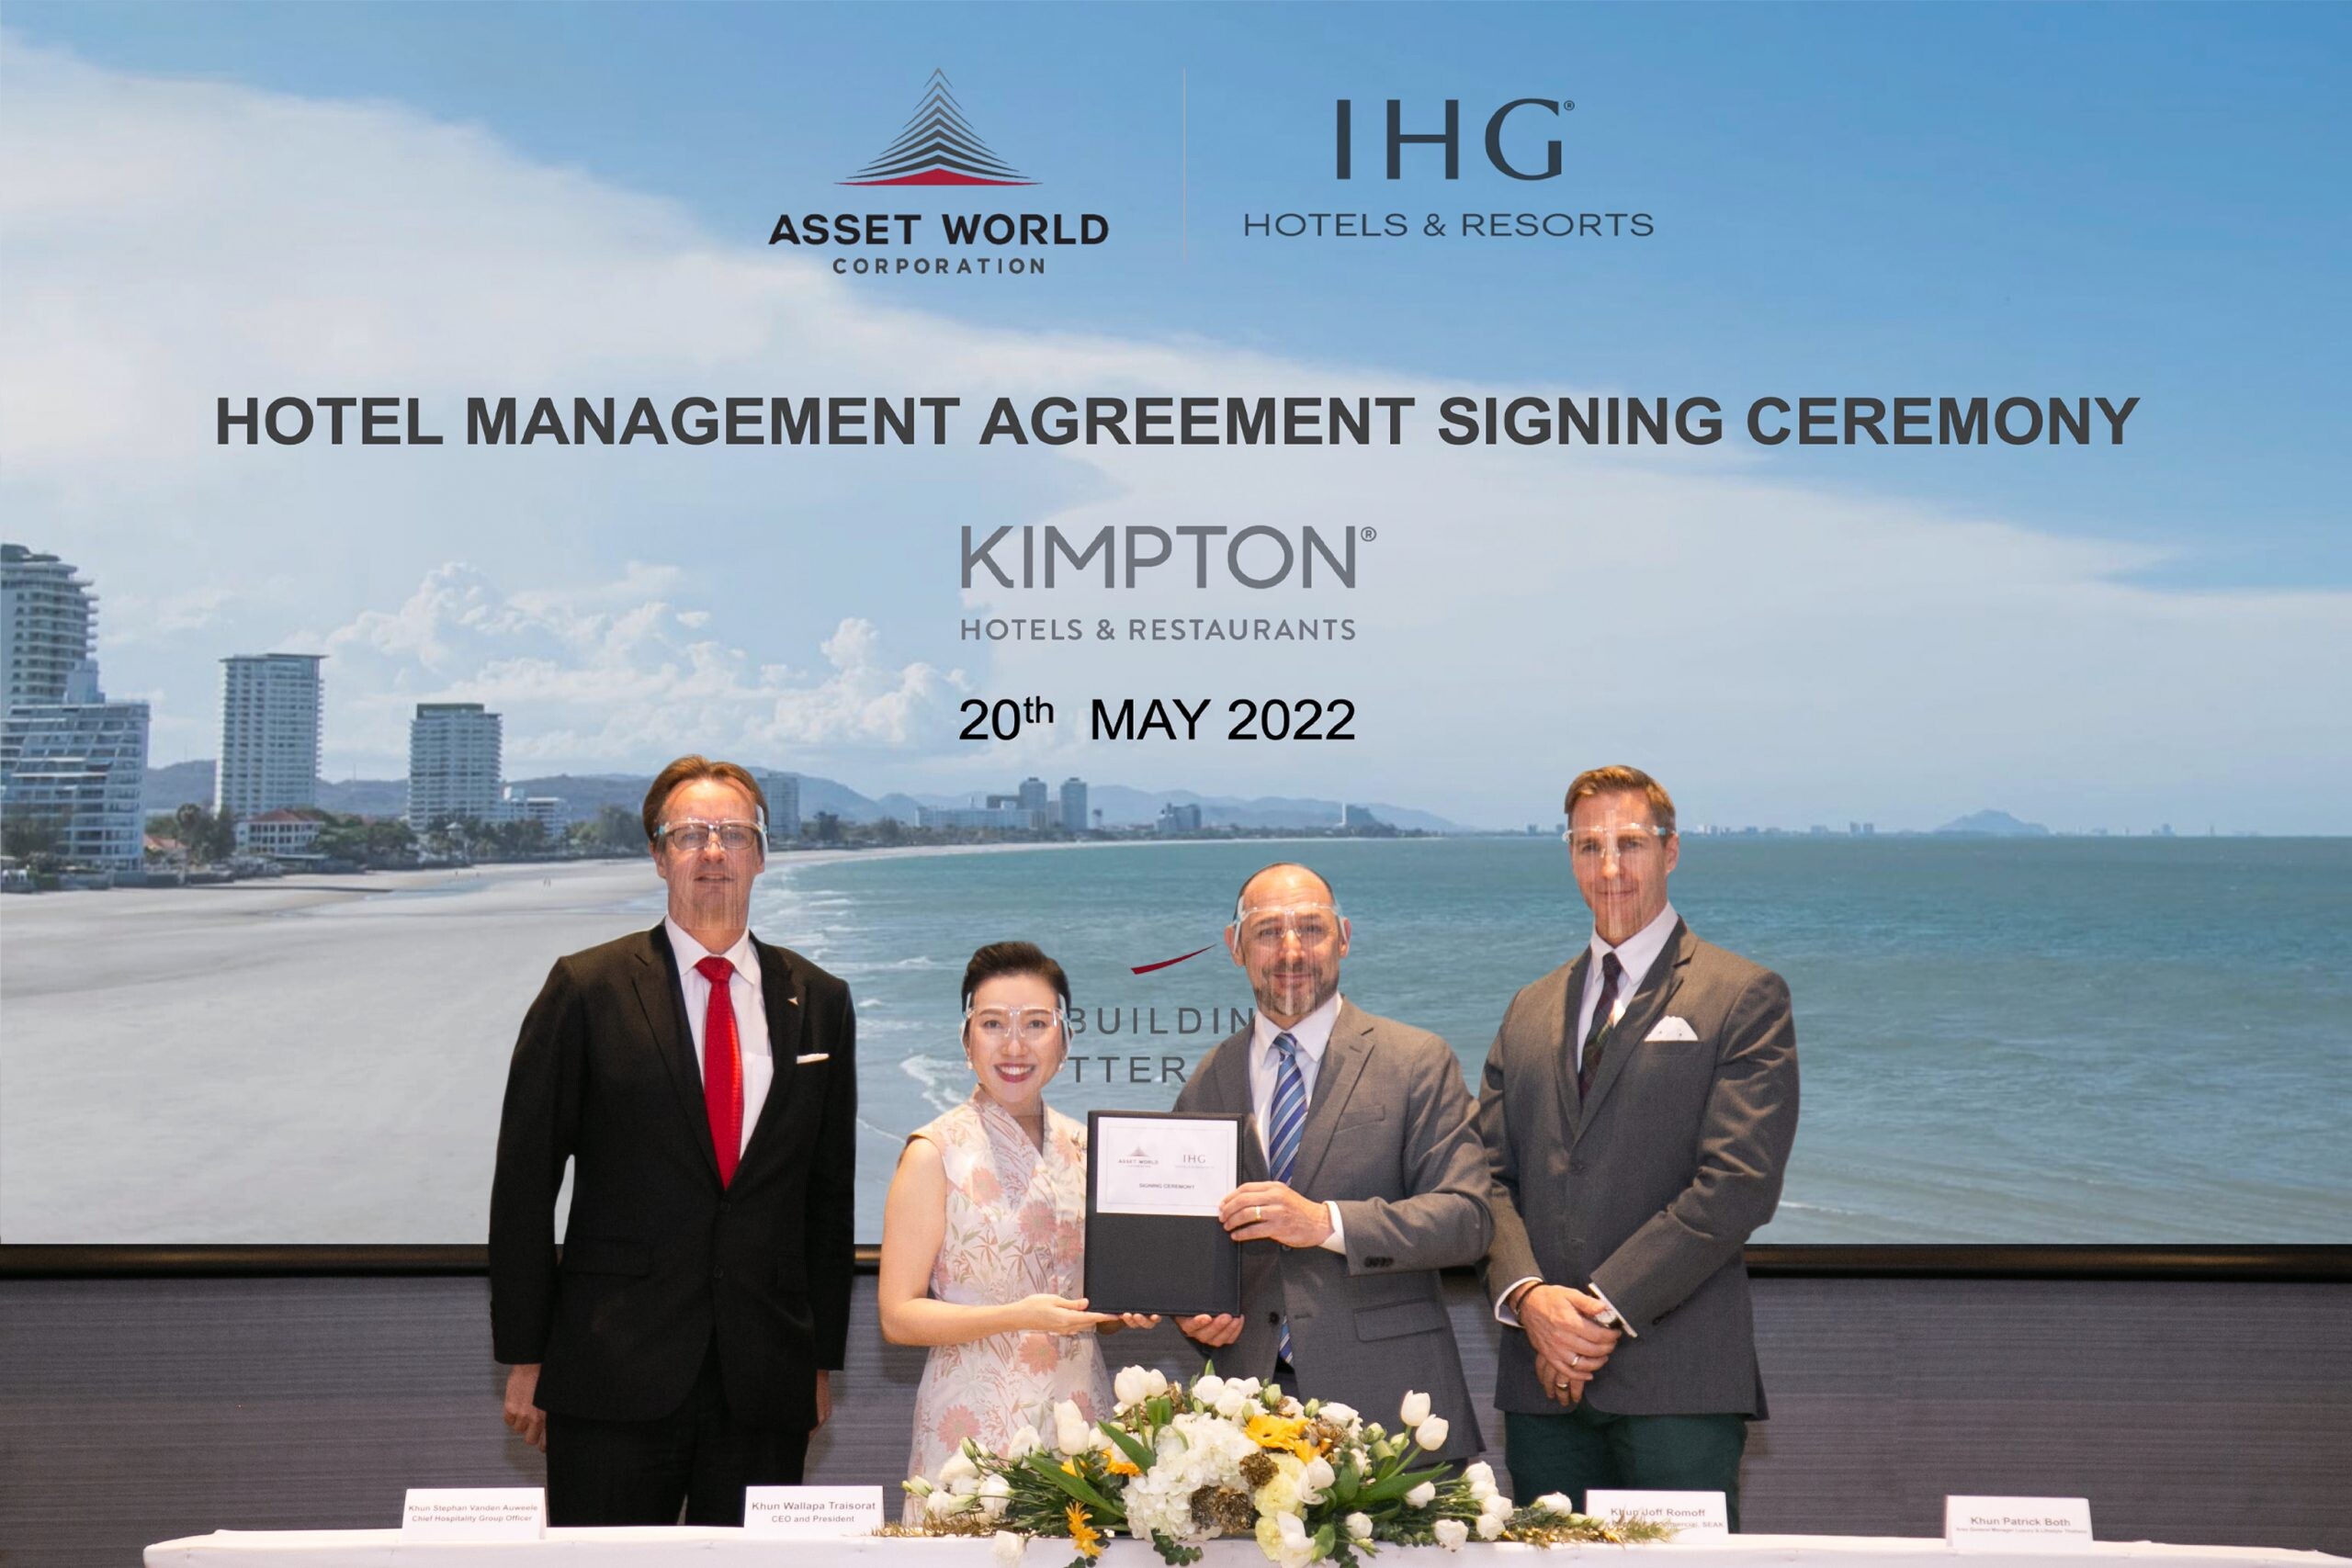 AWC signs agreement with IHG to manage Kimpton Hua Hin Resort, responding to family & business travel demands after Thailand reopens